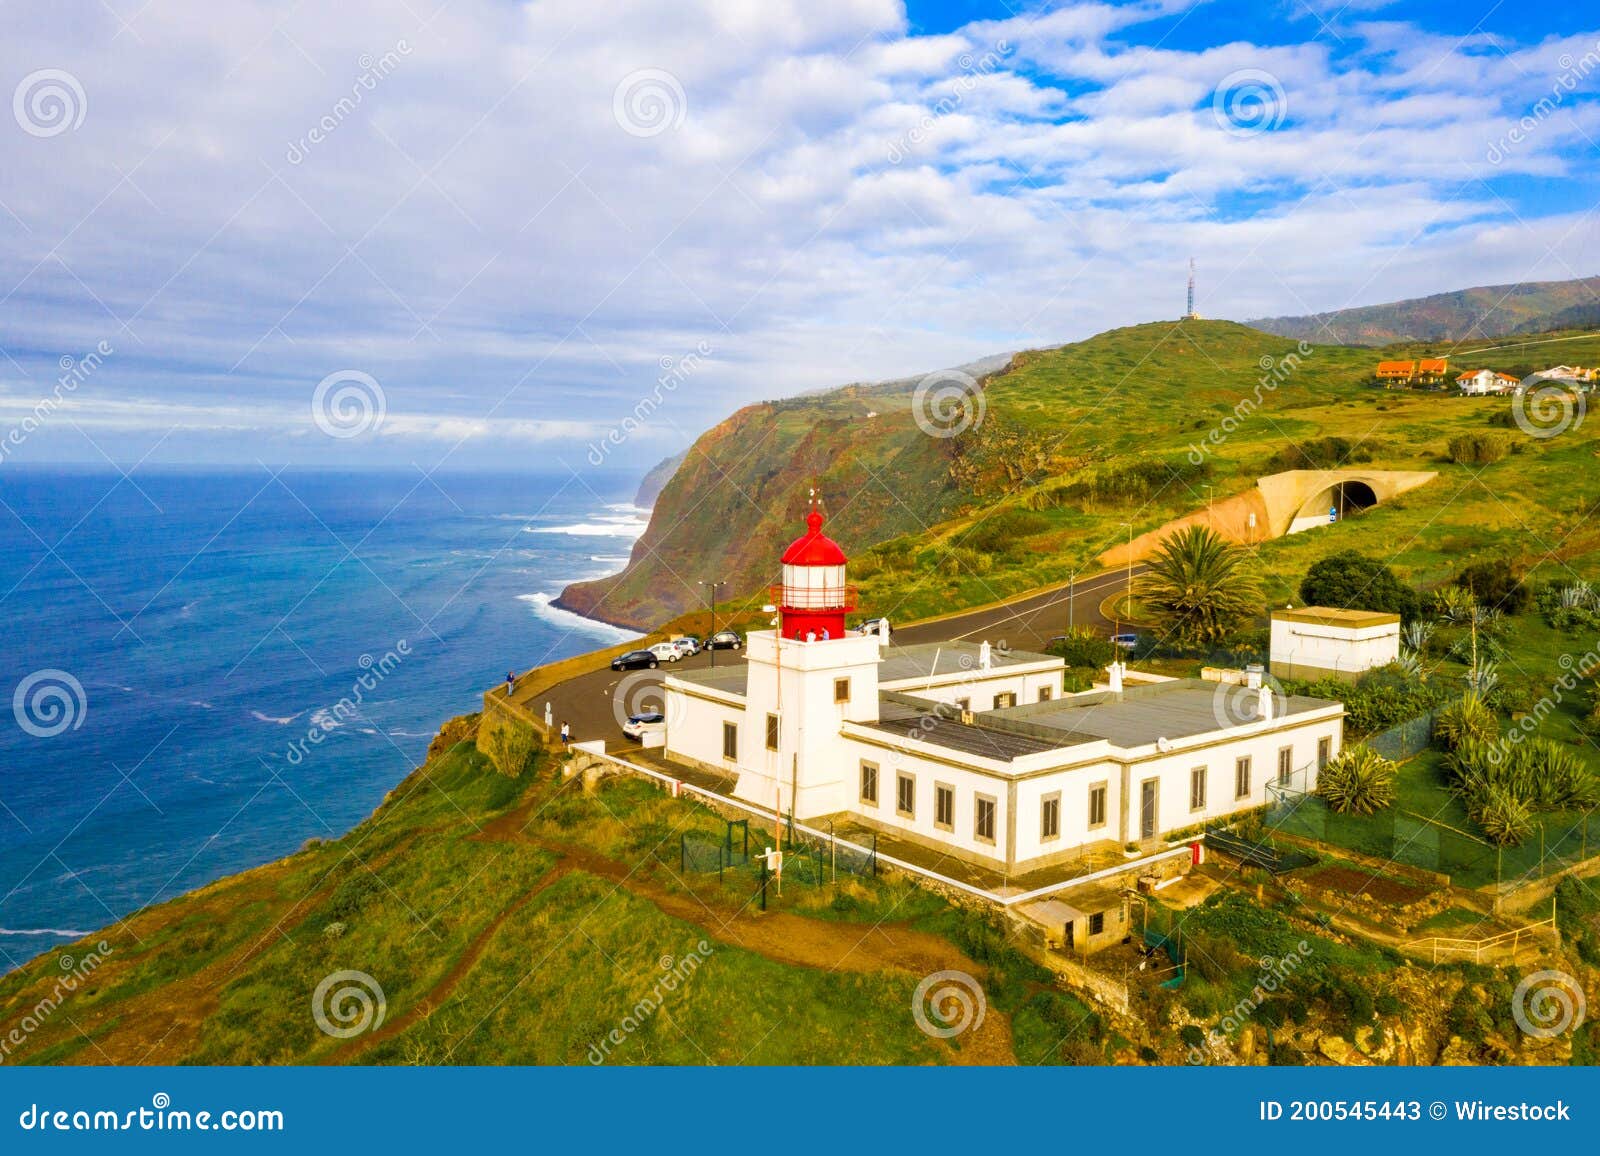 beautiful ponta do pargo by the ocean in portugal